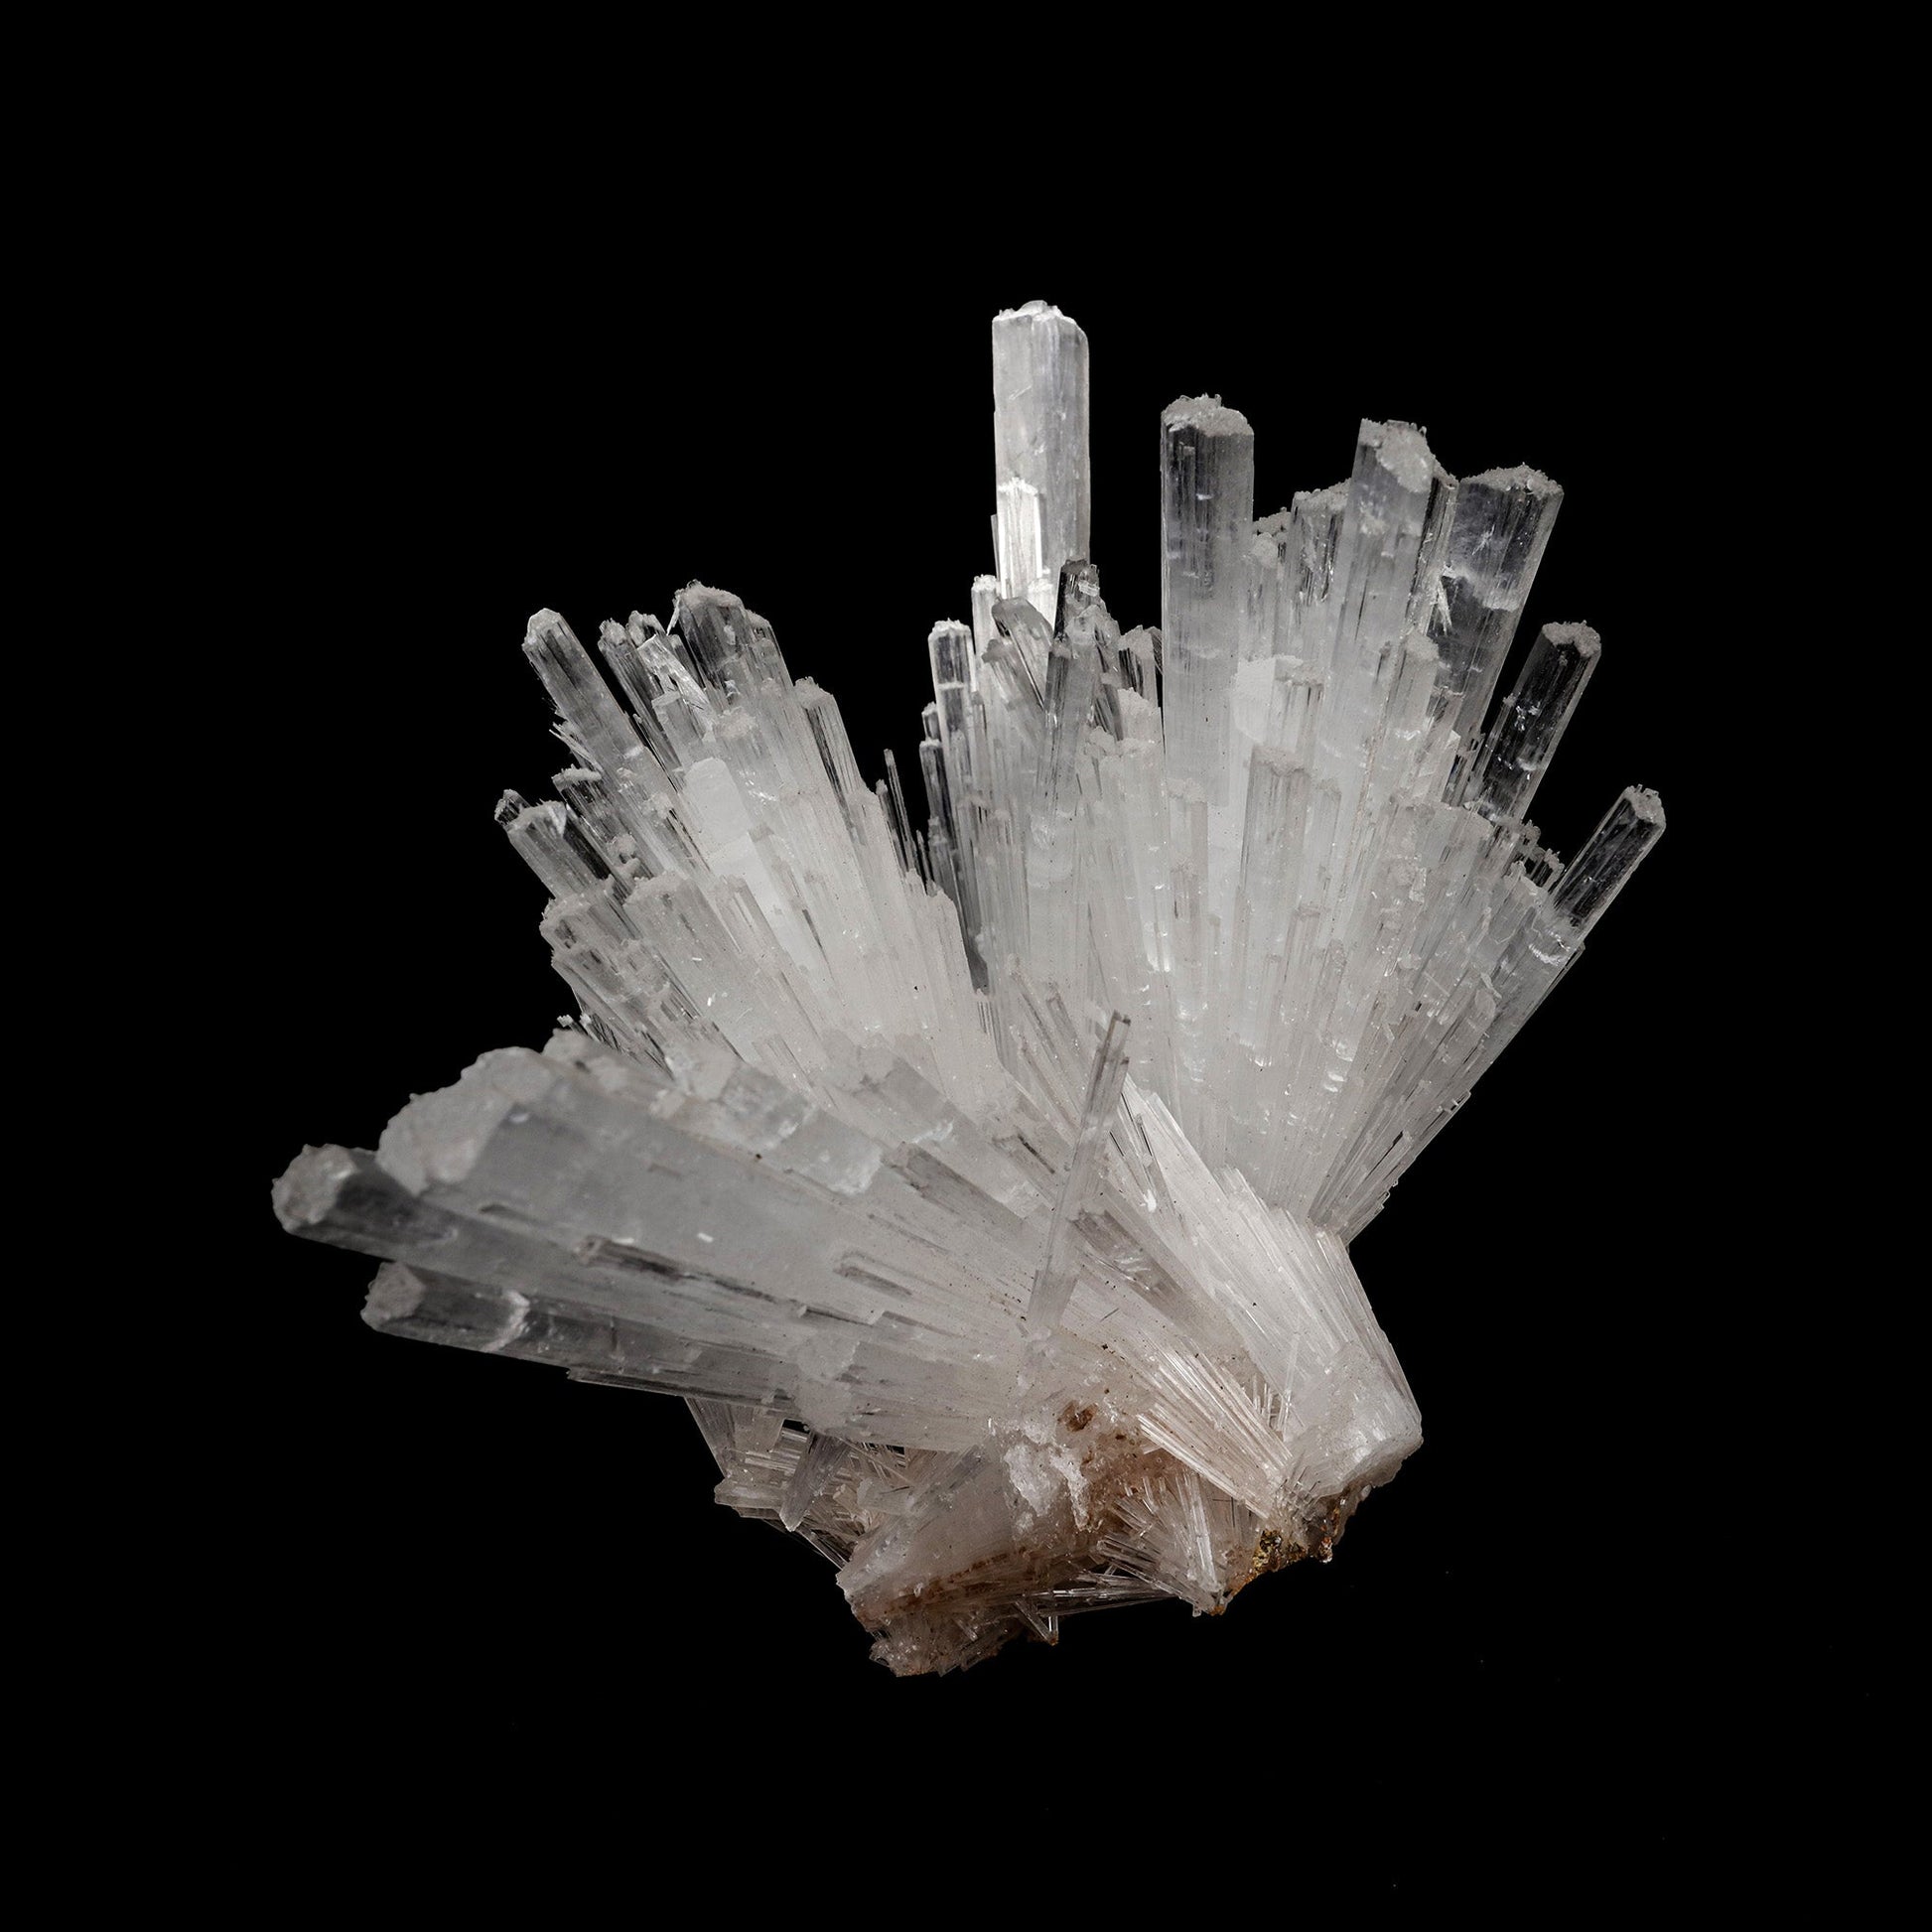 Scolecite Sprays Natural Mineral Specimen # B 5223  https://www.superbminerals.us/products/scolecite-sprays-natural-mineral-specimen-b-5223  Features: A large, tapered spray of elongated colorless Scolecite crystals. There is a small remnant of matrix attached with a small Stilbite crystal. The Scolecite crystals are glassy and highly translucent with transparent terminations. A beautiful specimen in excellent condition. Primary Mineral(s): Scolecite